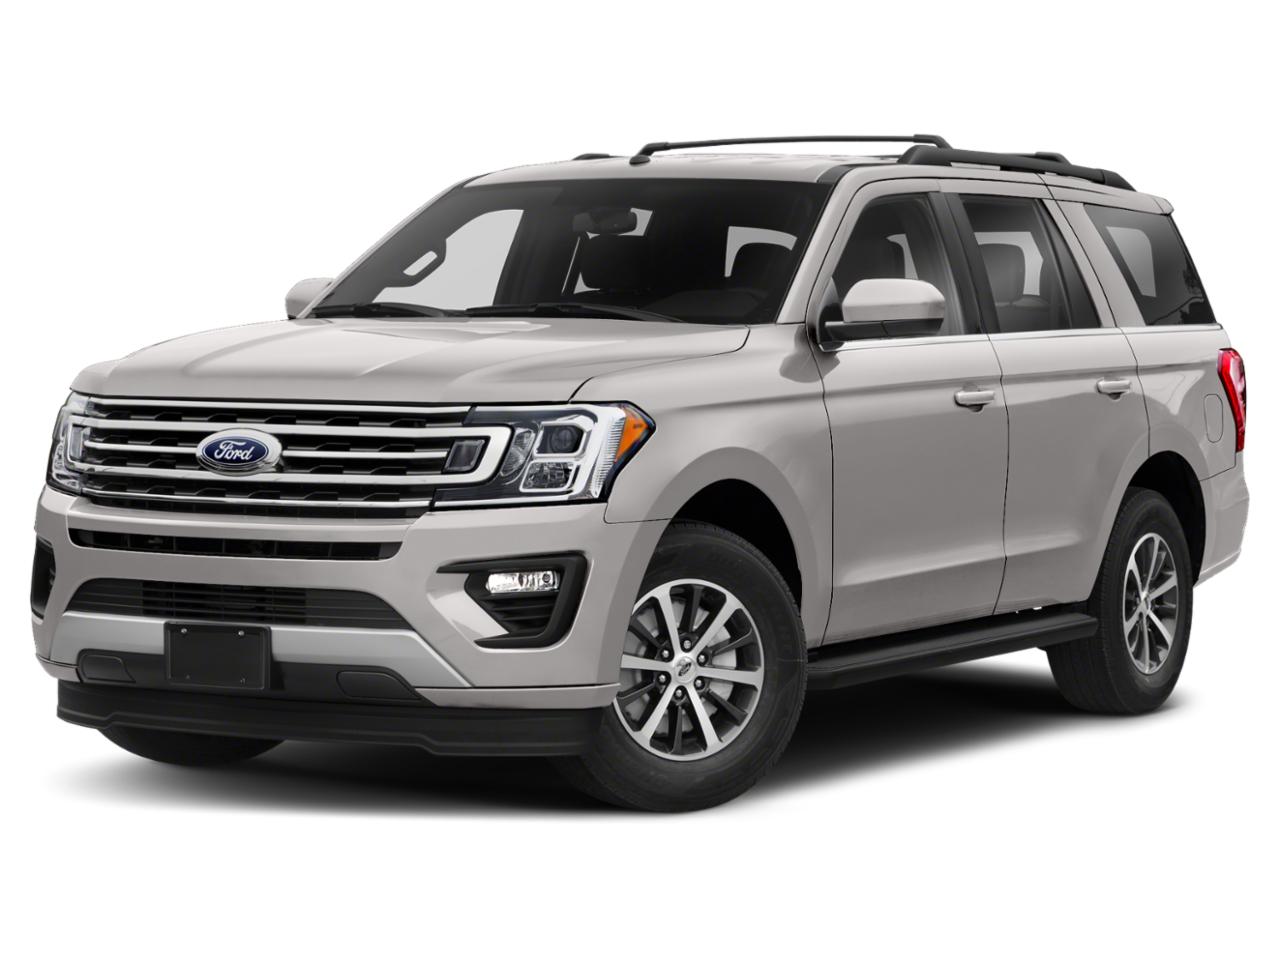 2018 Ford Expedition Vehicle Photo in BATON ROUGE, LA 70809-4546